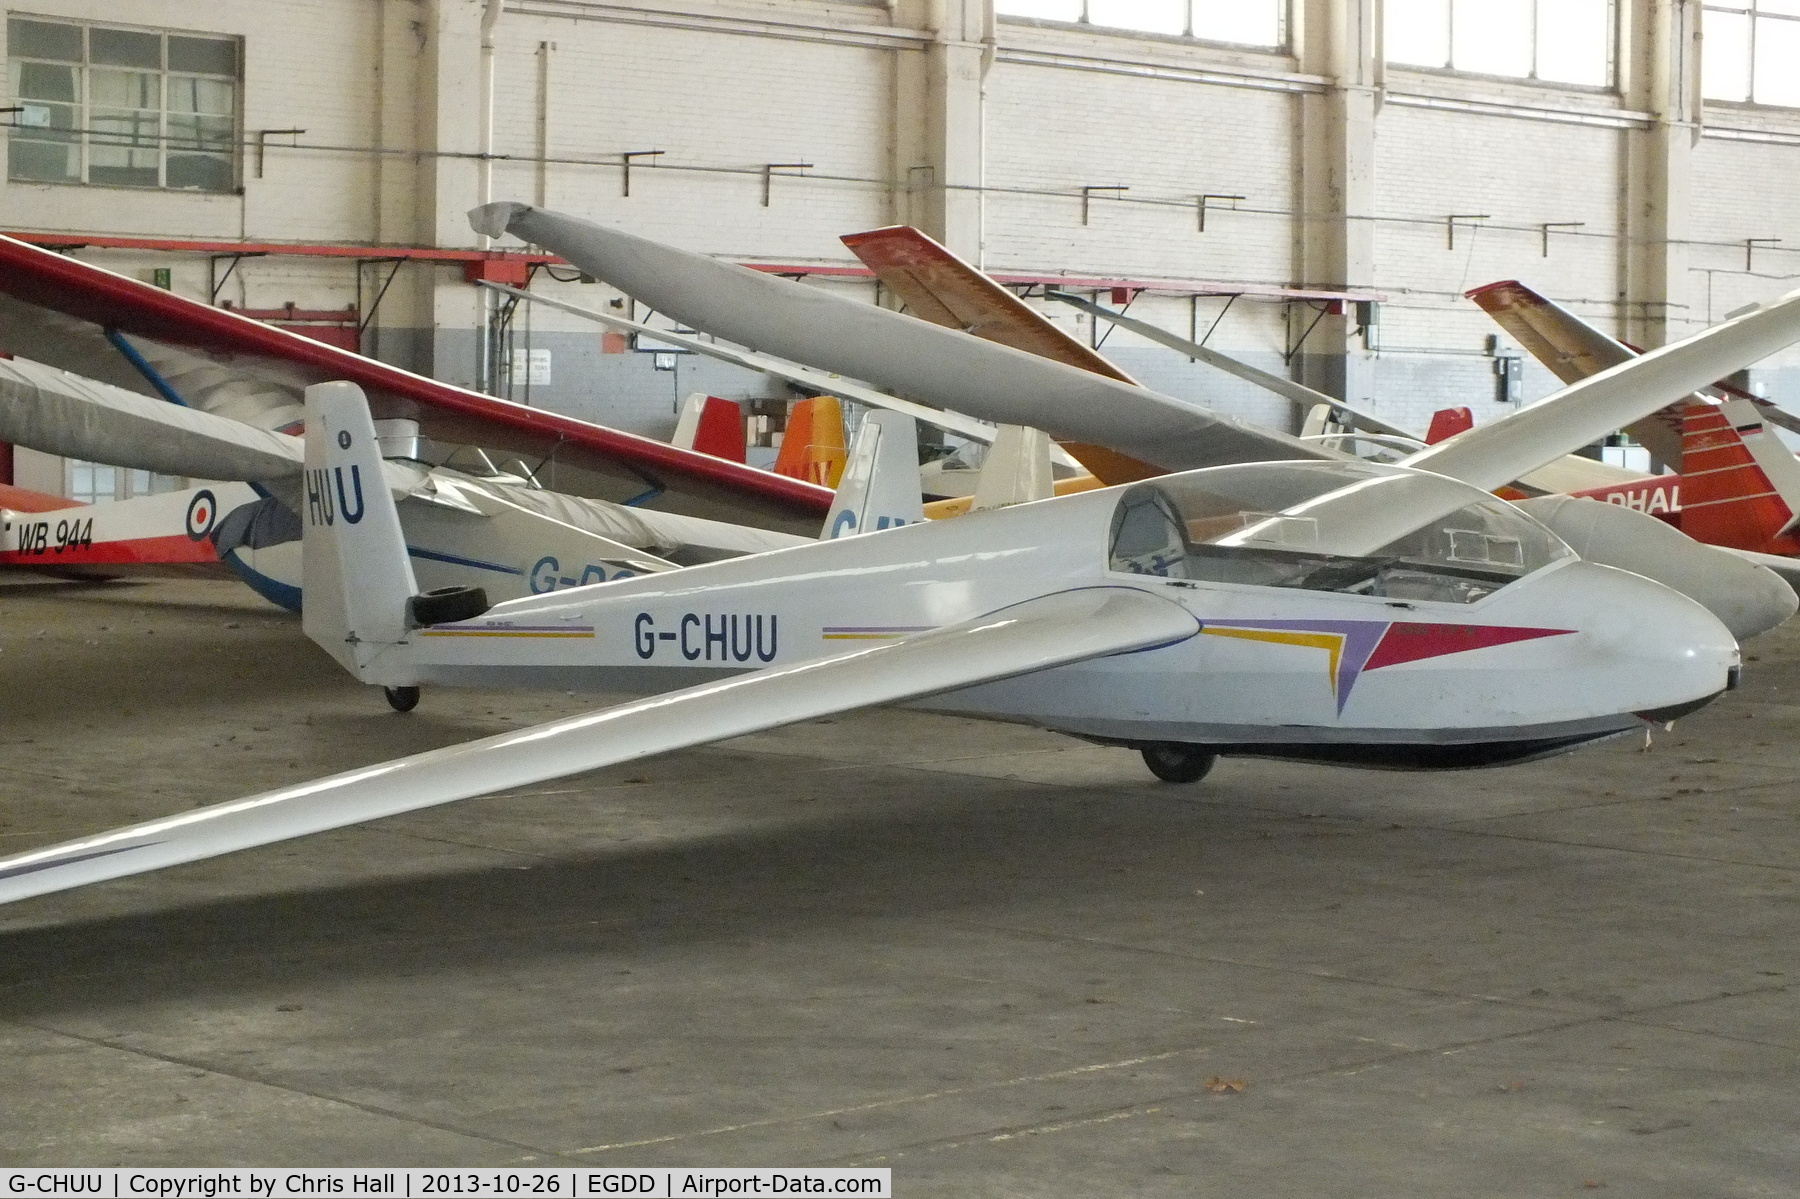 G-CHUU, 1976 Schleicher ASK-13 C/N 13527, hangared at Bicester